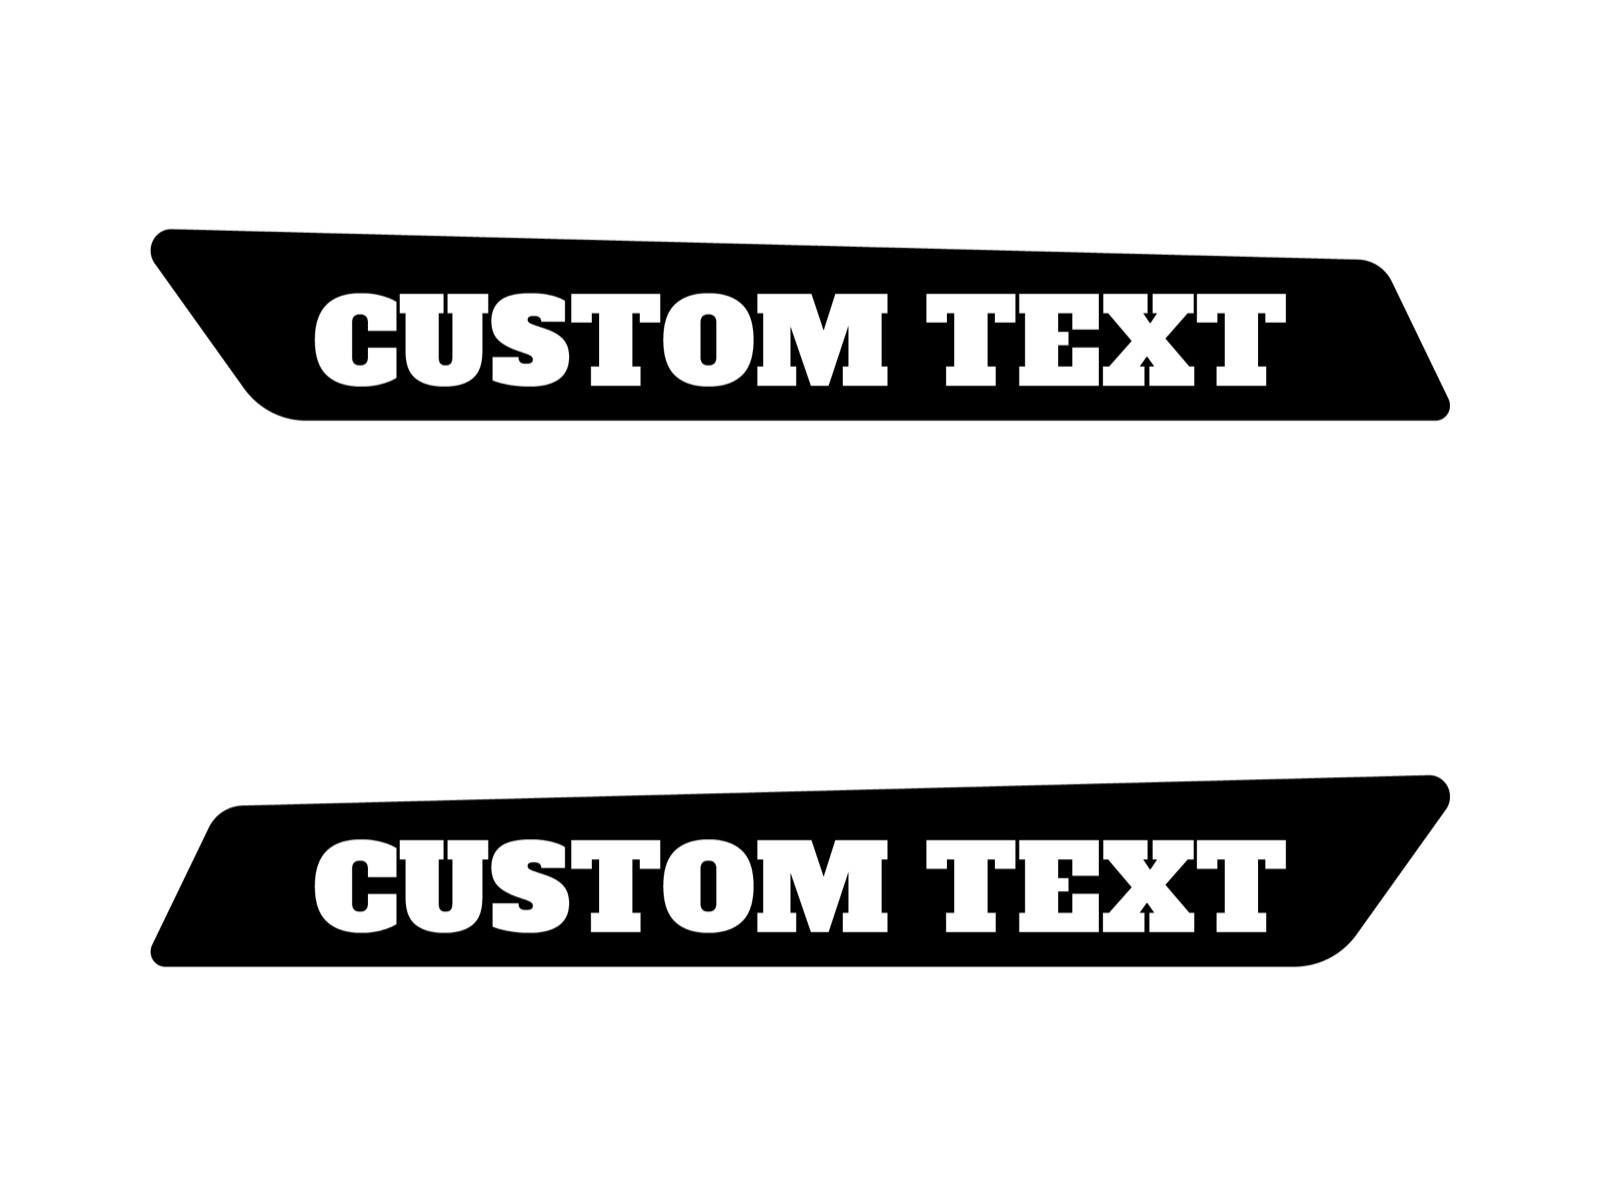 CUSTOM TEXT Made to Order Saddlebag Latch Inserts for Harley Touring 2014+.